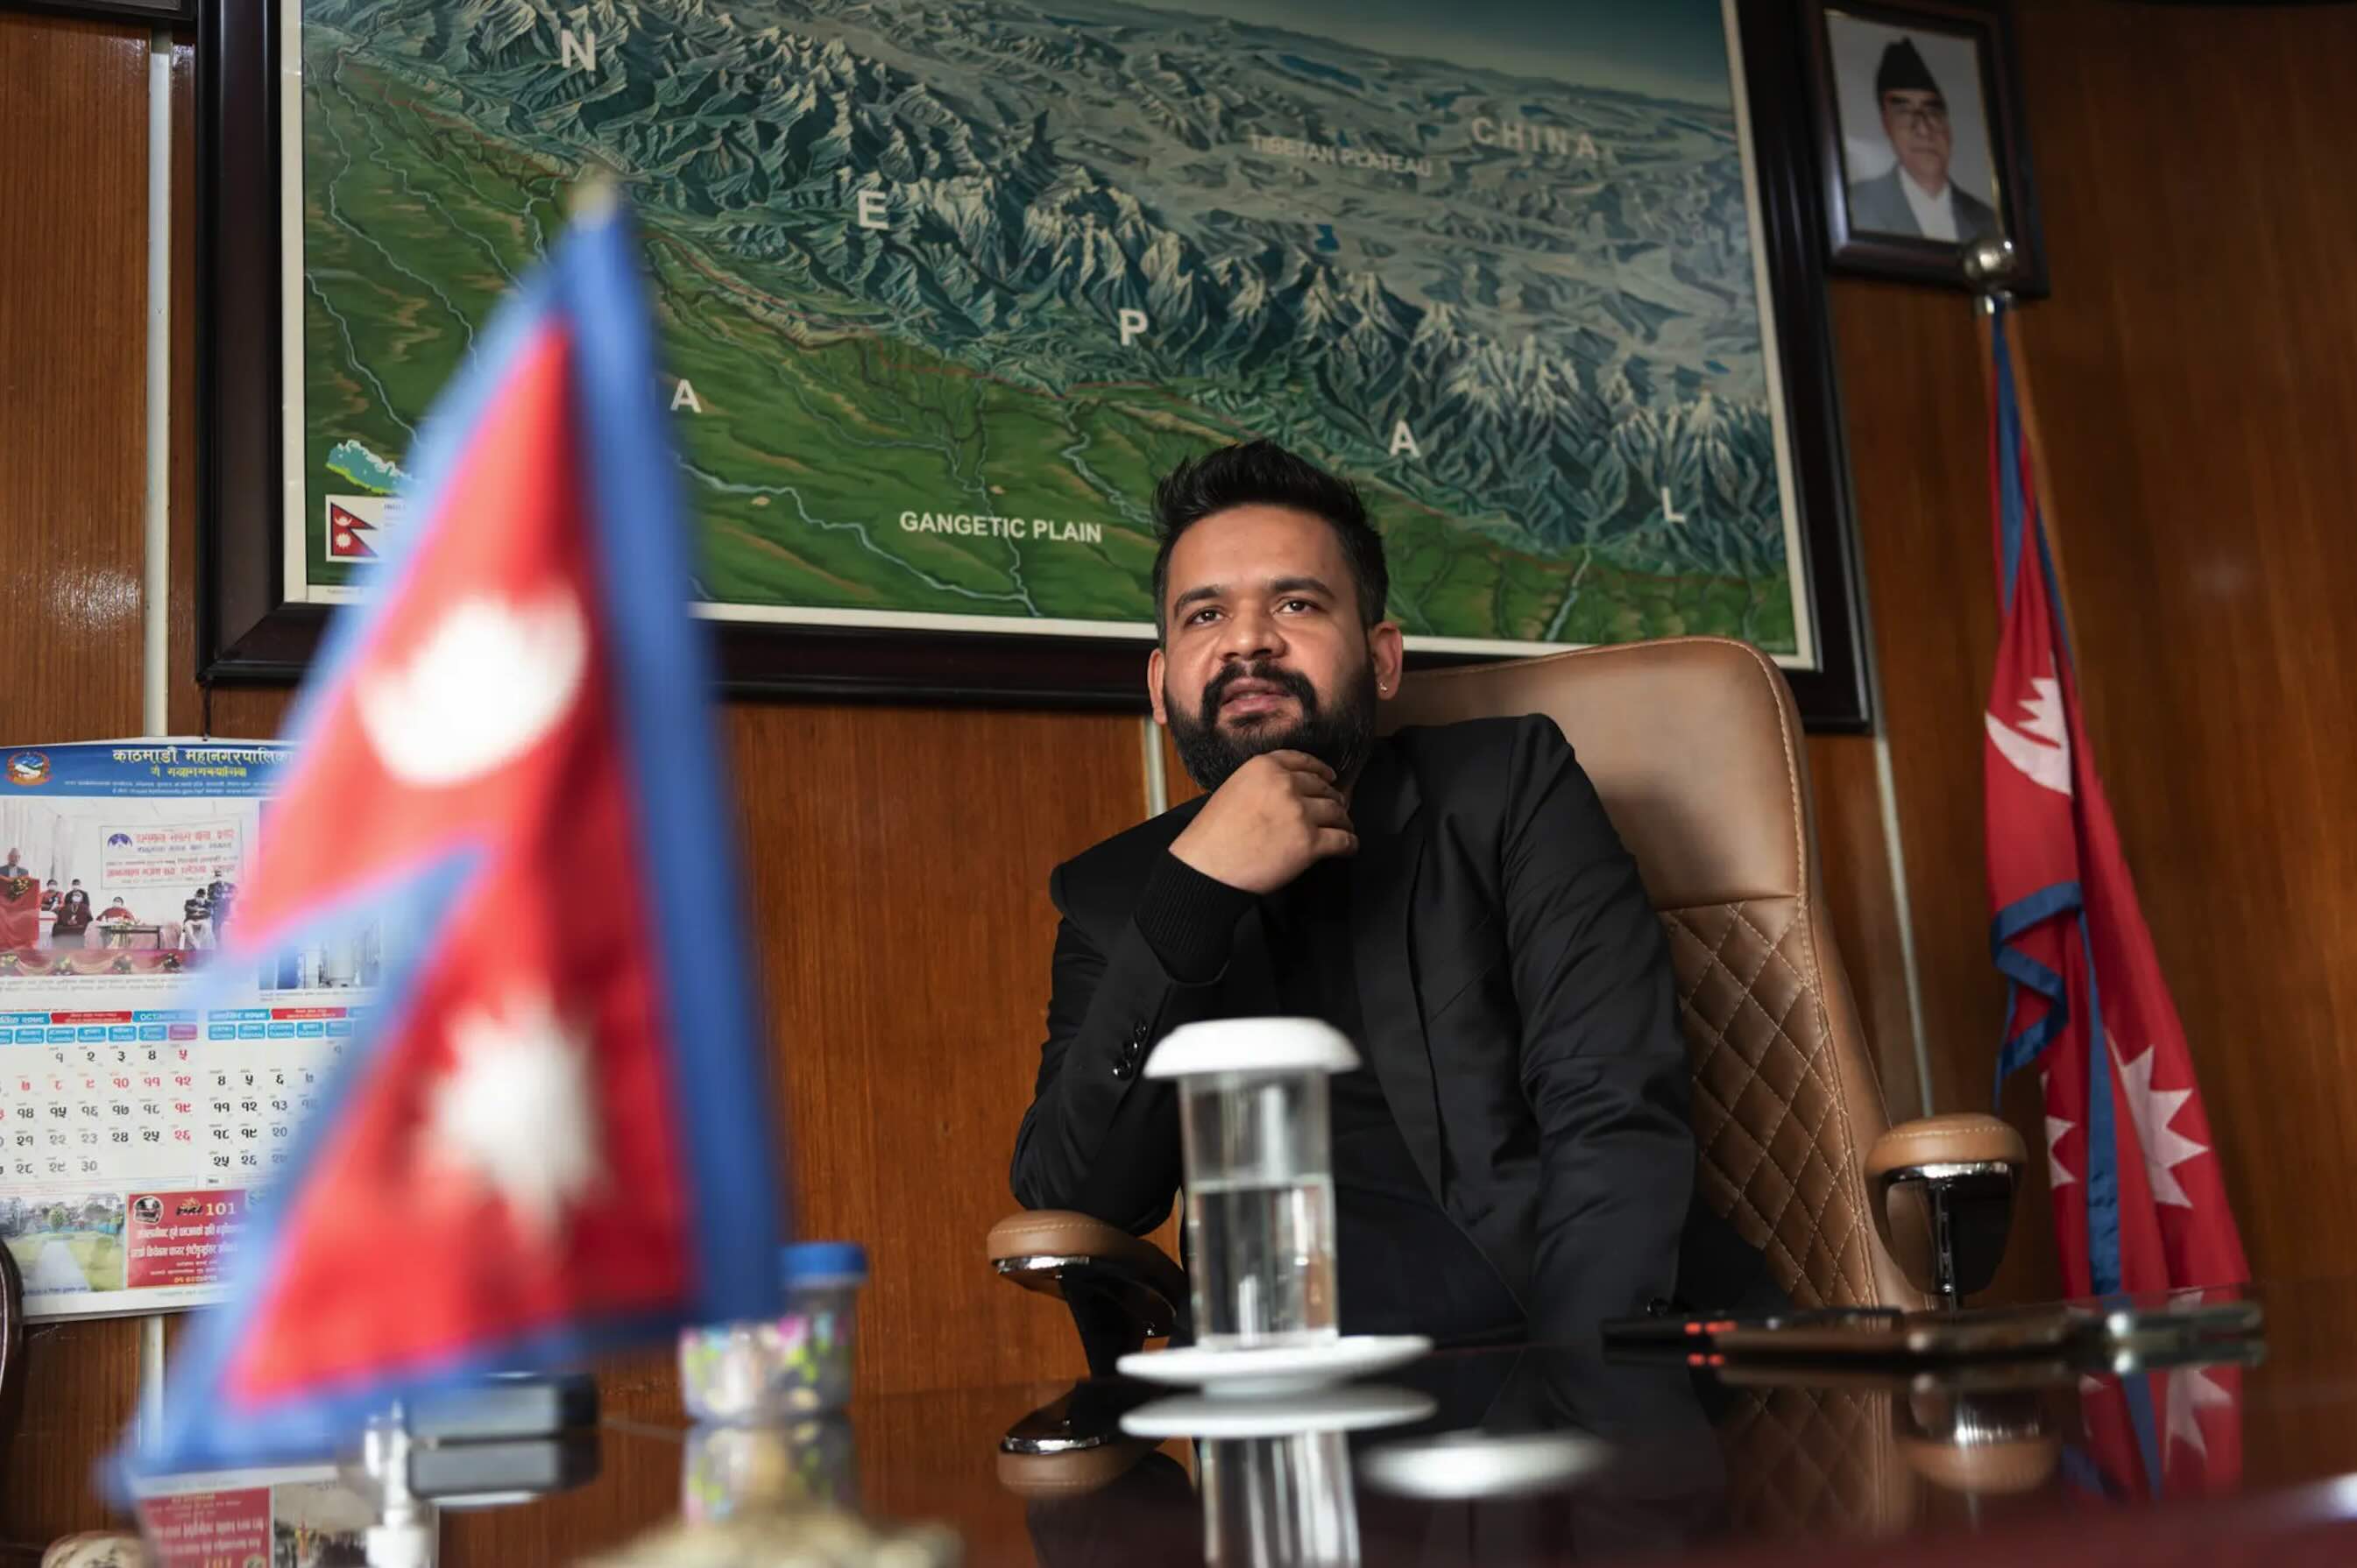 Mayor Shah's Poetic Protest: Pokhara Airport and the Shadow of Chinese Debt